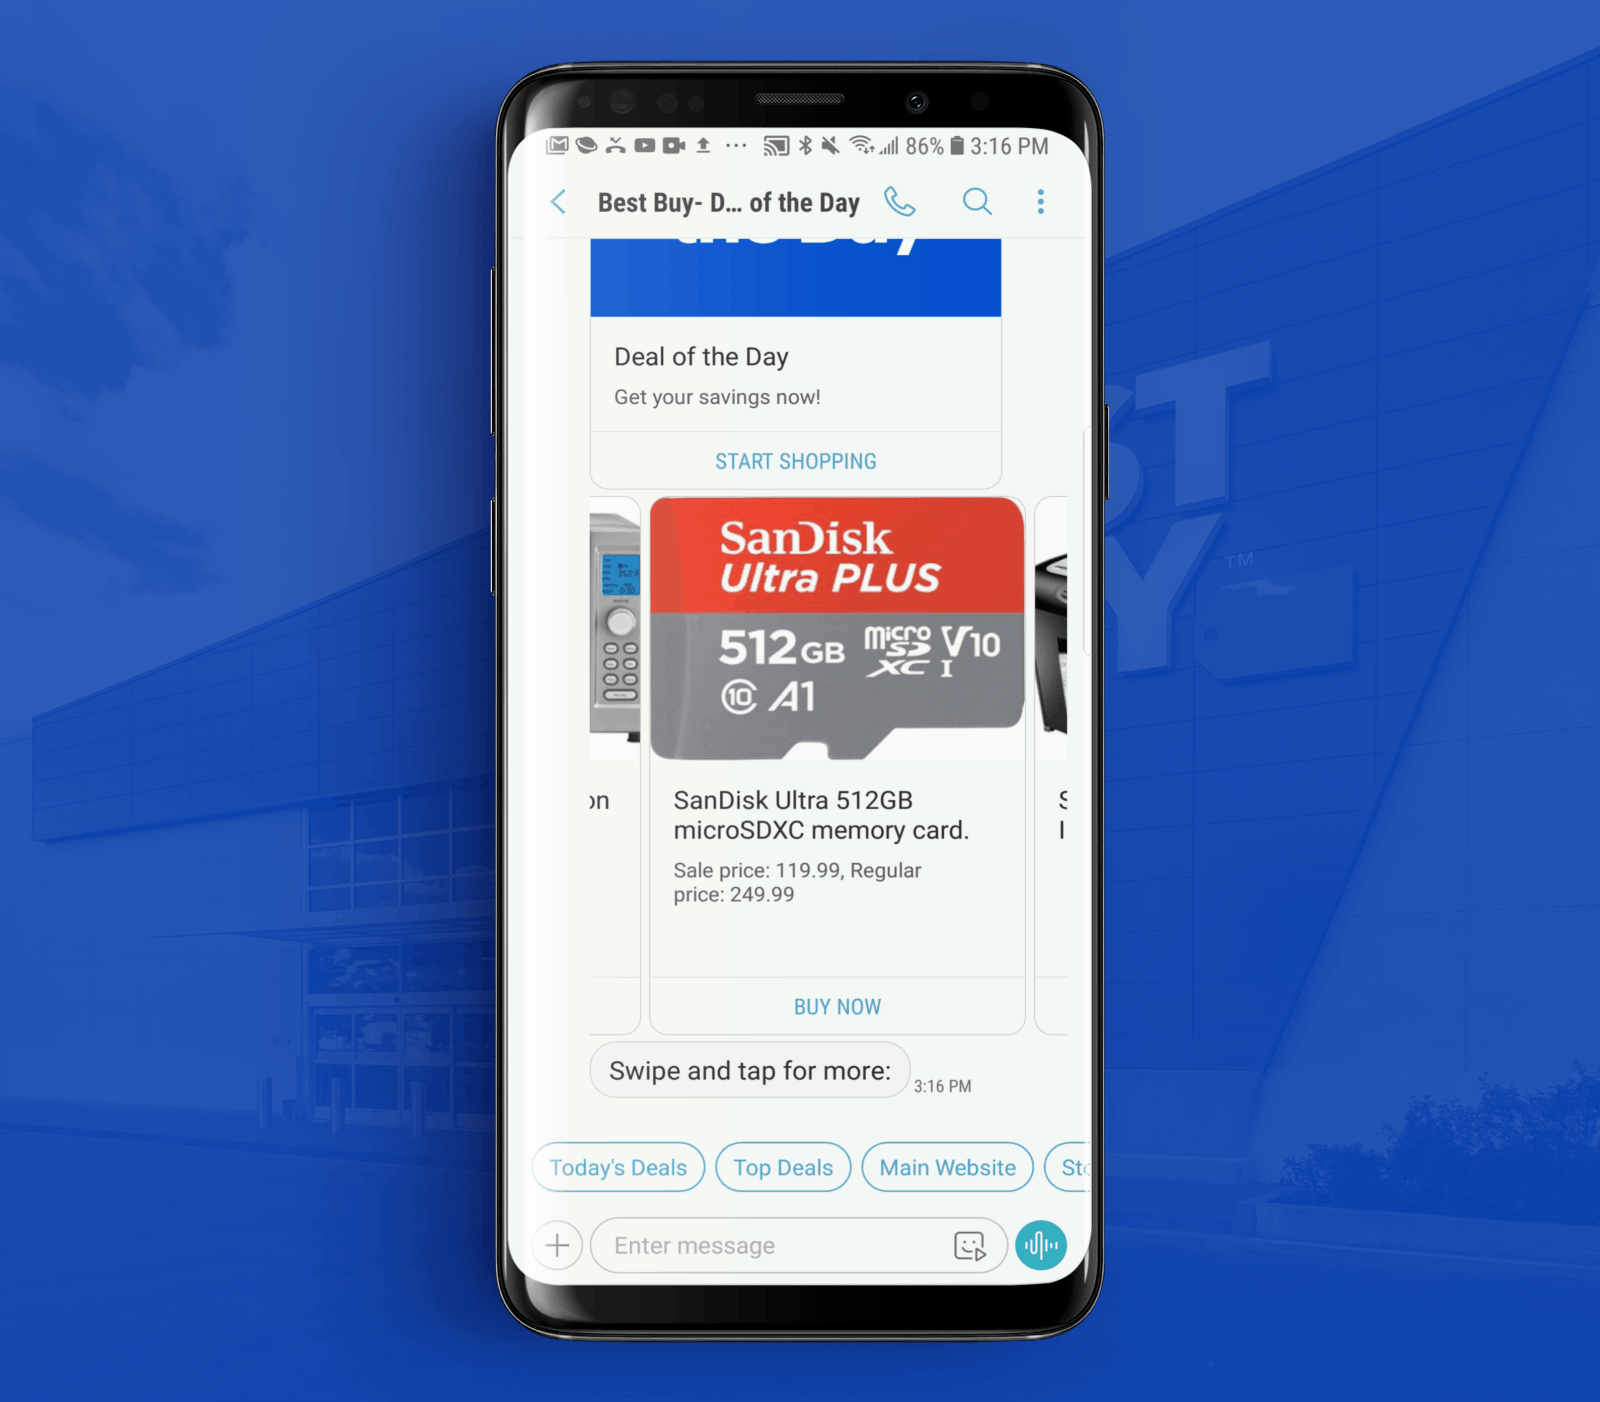 RCS Business Messaging Example from Best Buy 5